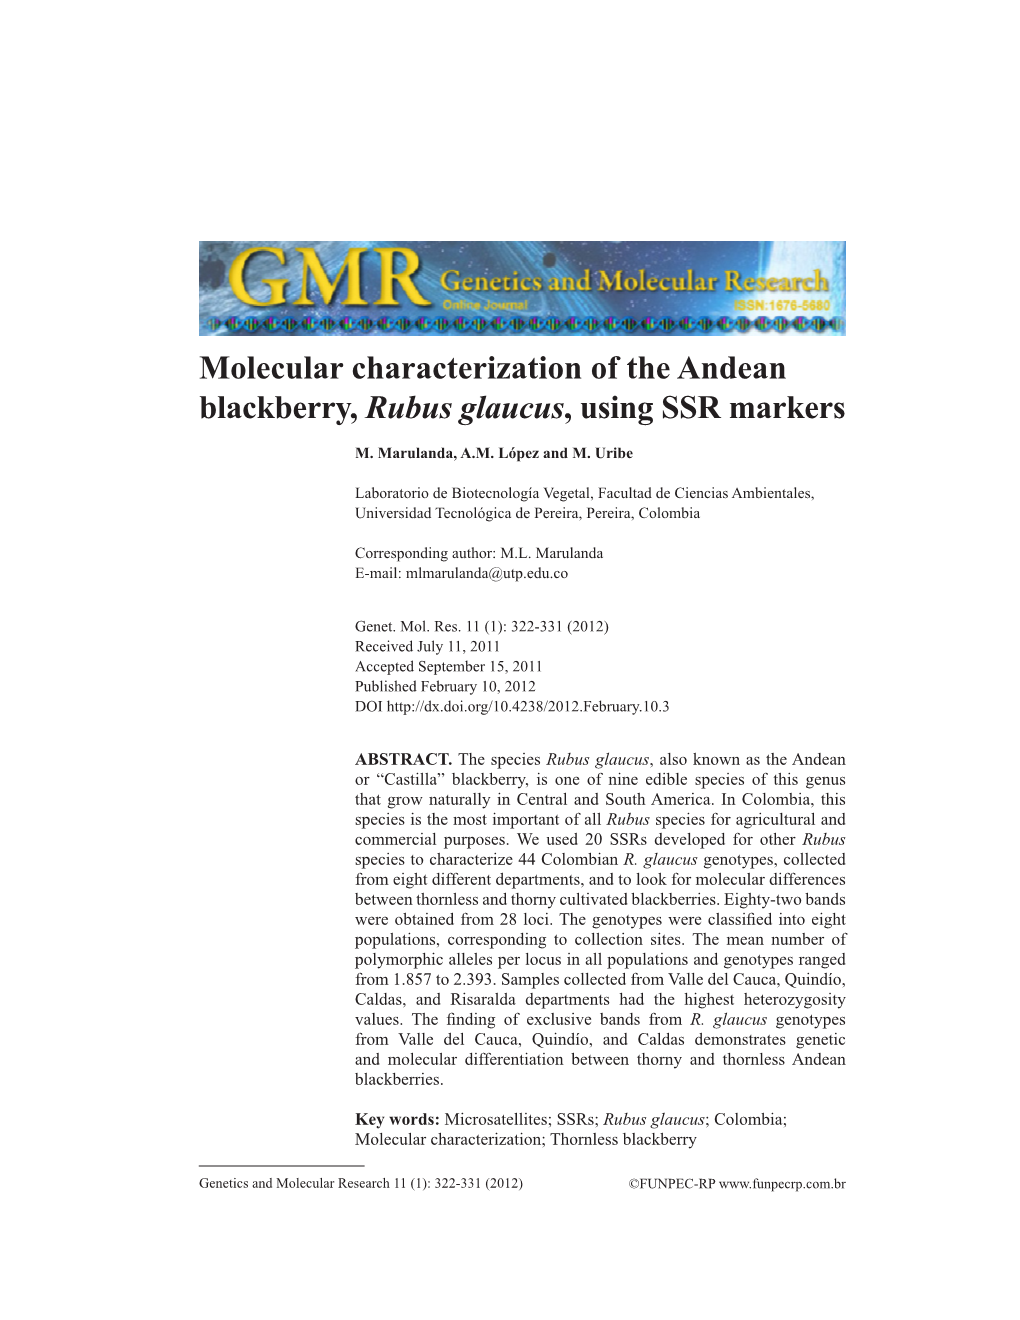 Molecular Characterization of the Andean Blackberry, Rubus Glaucus, Using SSR Markers